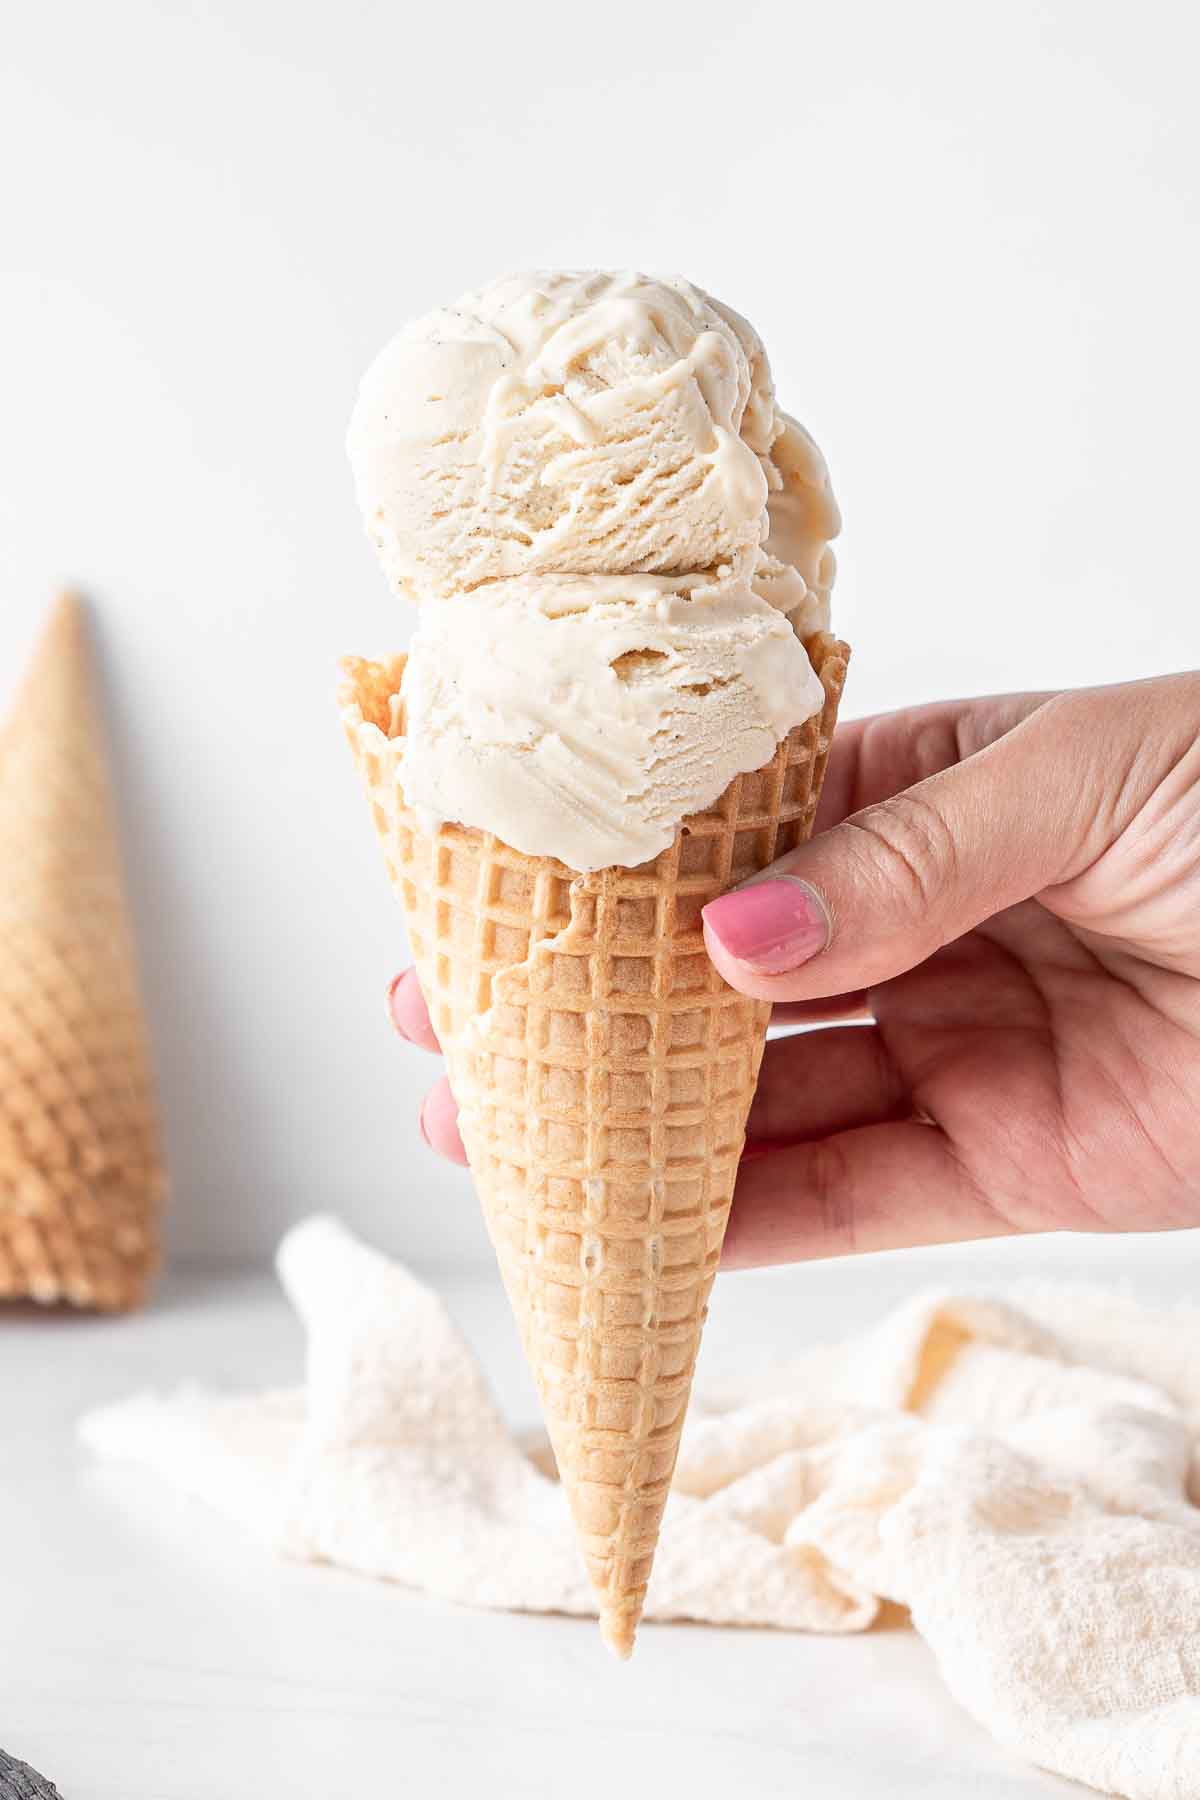 A hand holding an ice cream cone with two scoops of vegan vanilla ice cream.